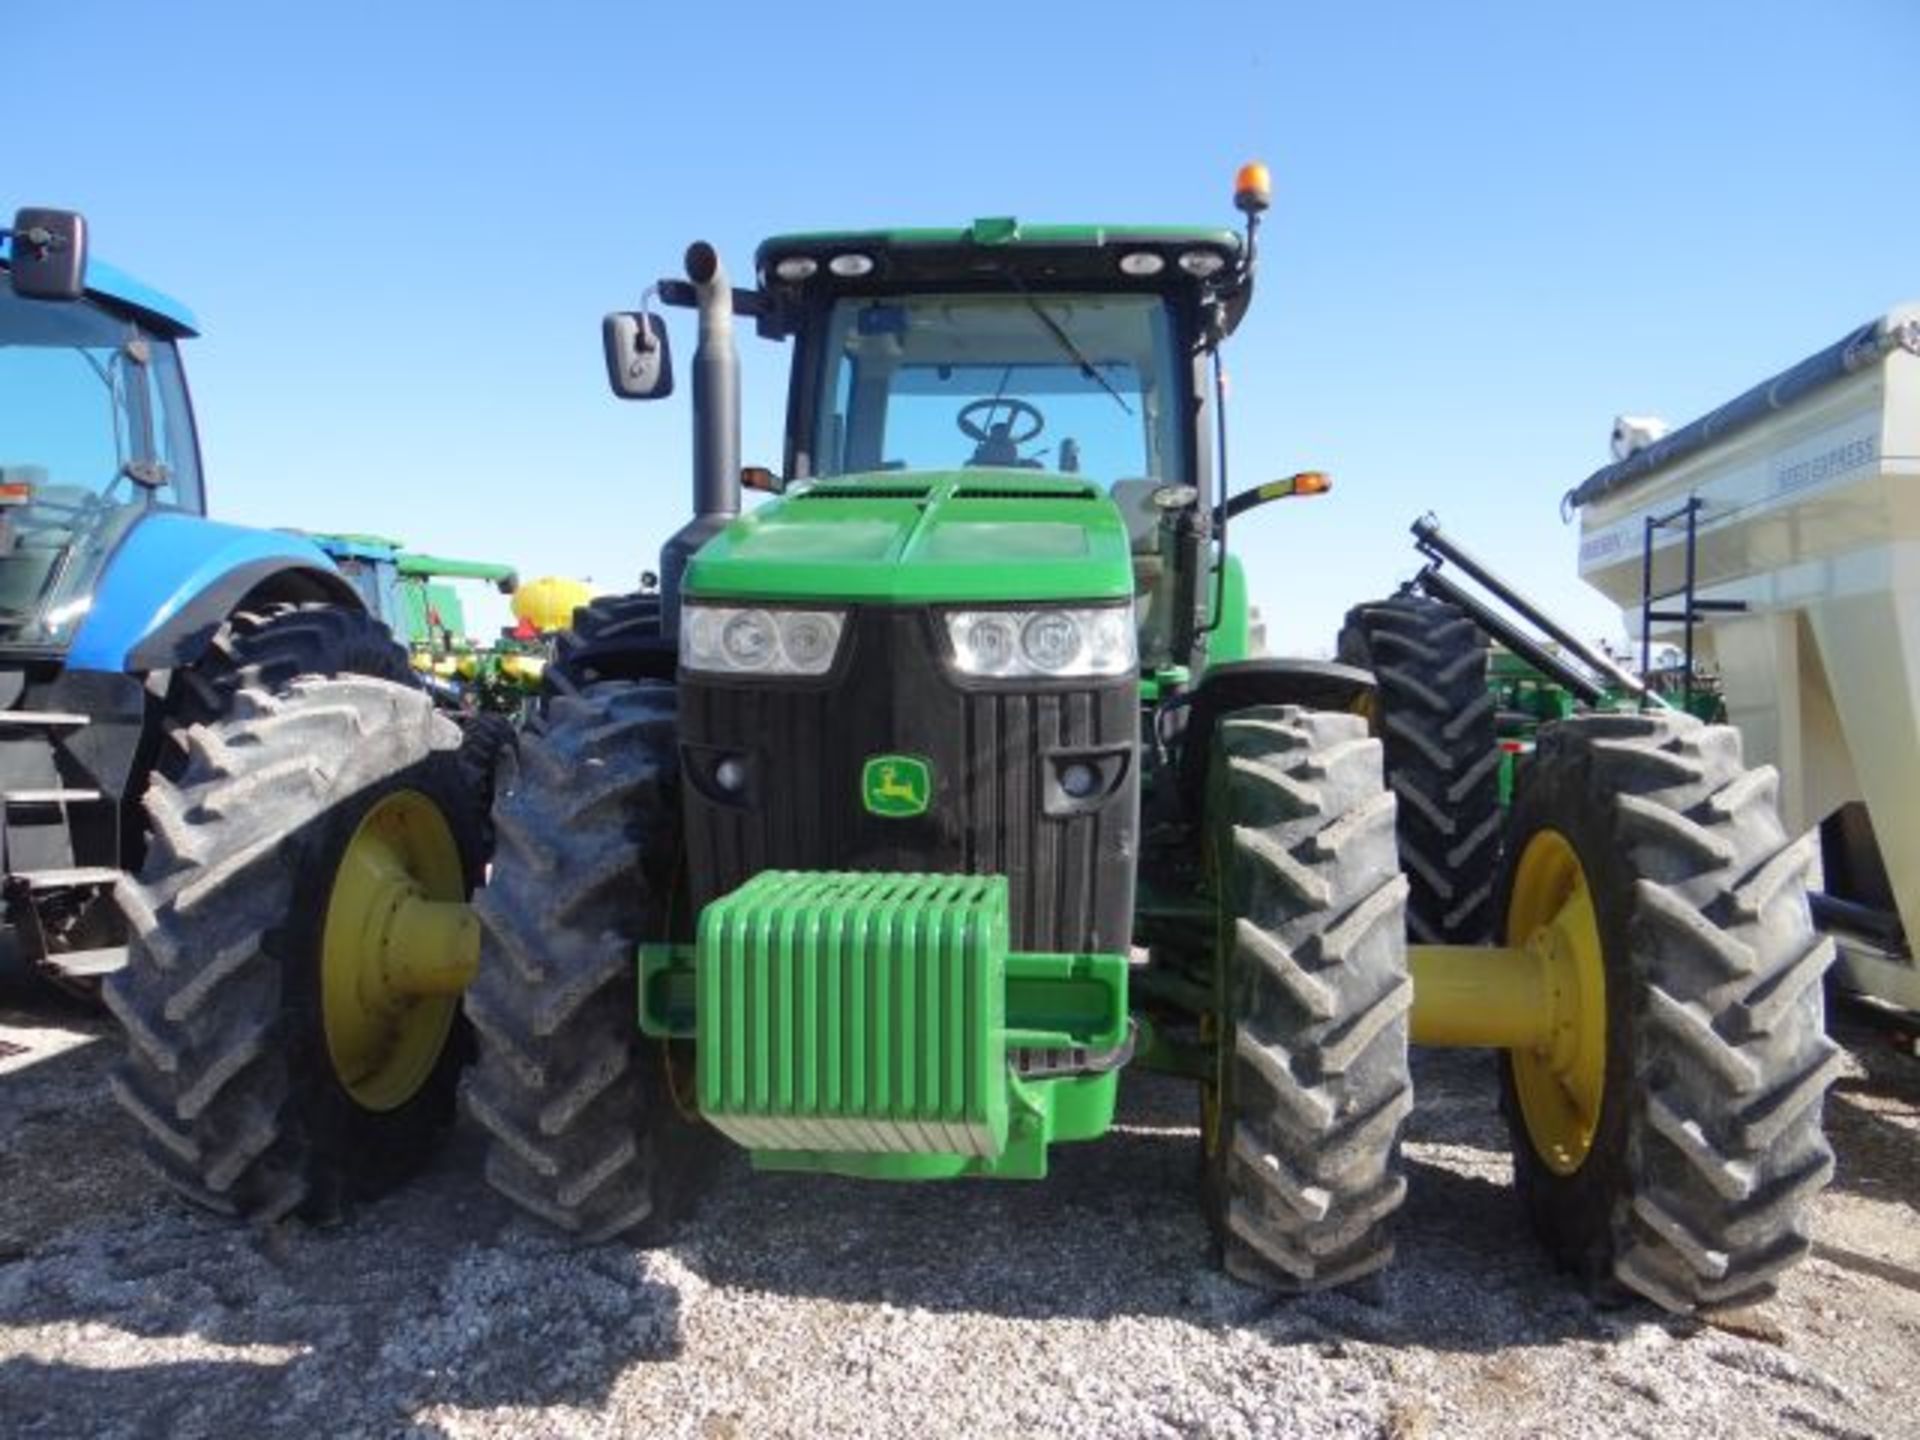 JD 8360R Tractor, 2012 50", Rear Tires, Front Duals, 4 Remotes, Auto Trac, IVT, ILS, Wts, 5244 hrs - Image 5 of 6